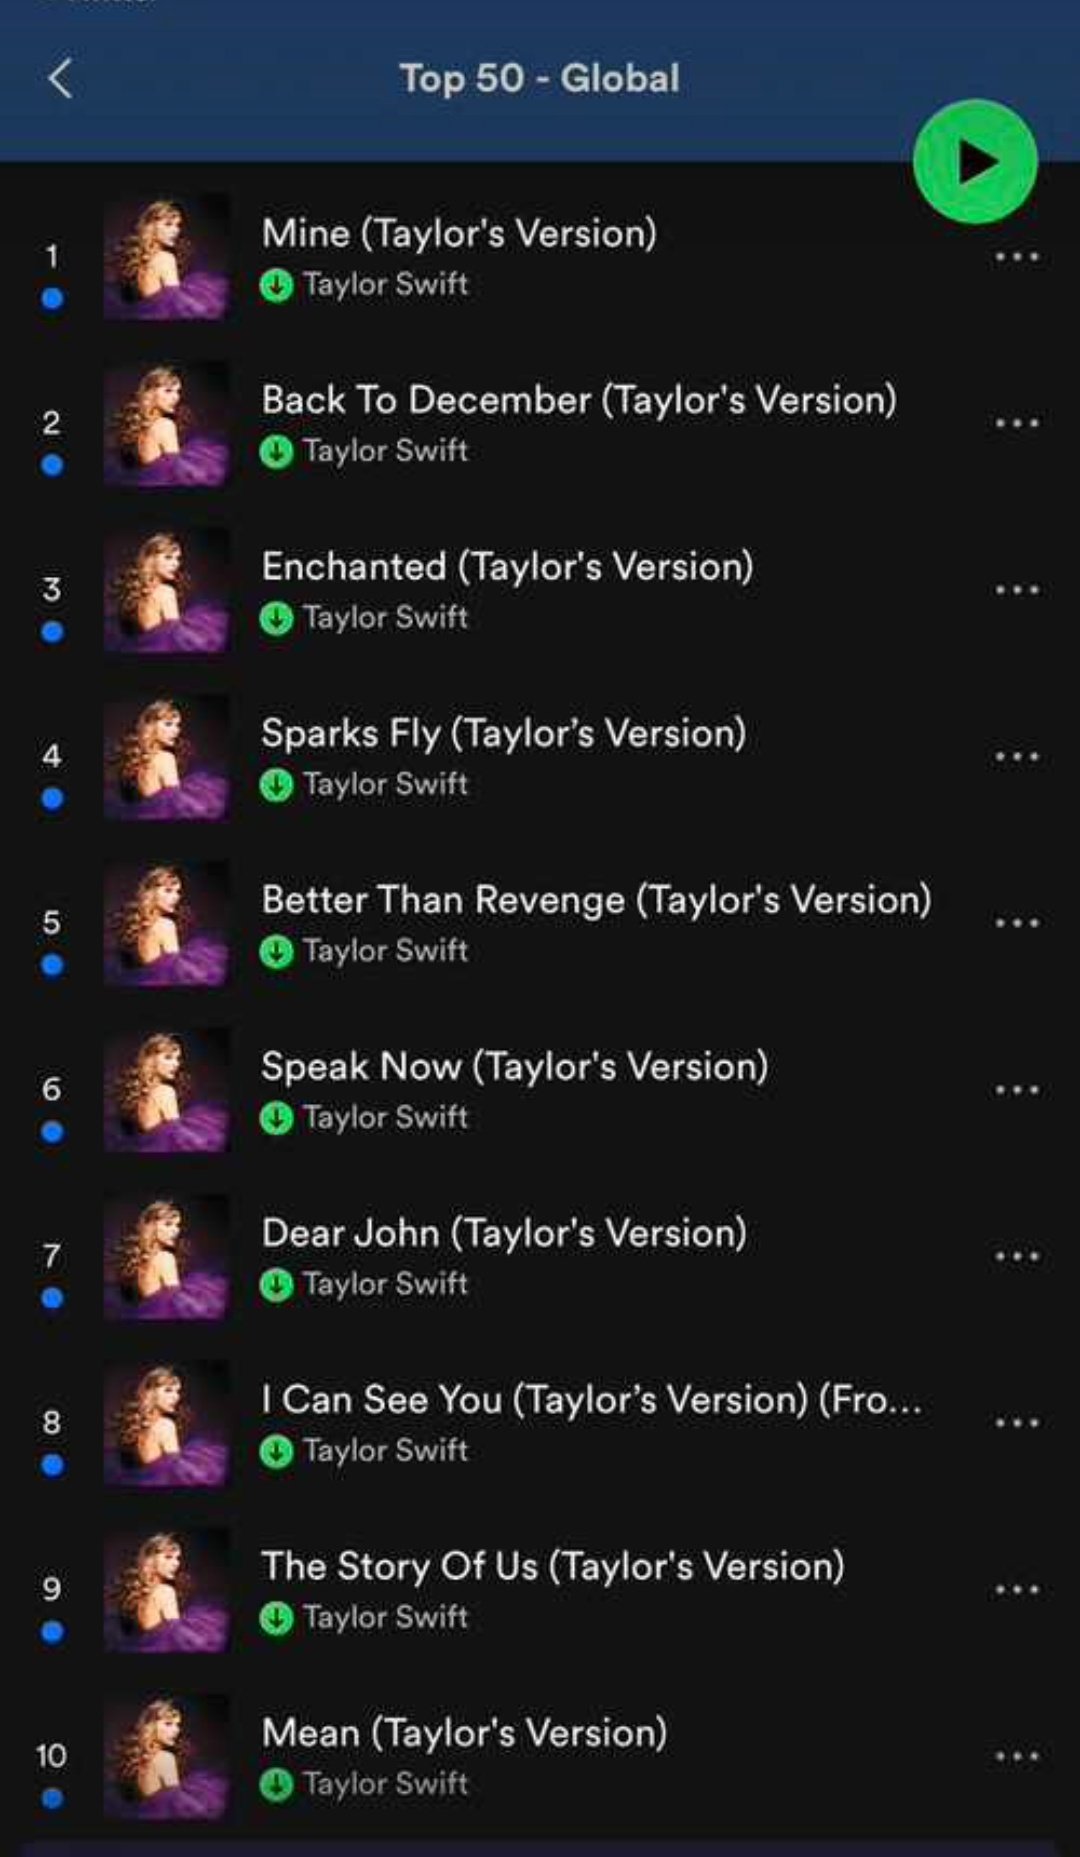 Taylor Swift Updates on X: 📈 @taylorswift13 has all the top 10 songs  from Top 50 - Global on Spotify  / X